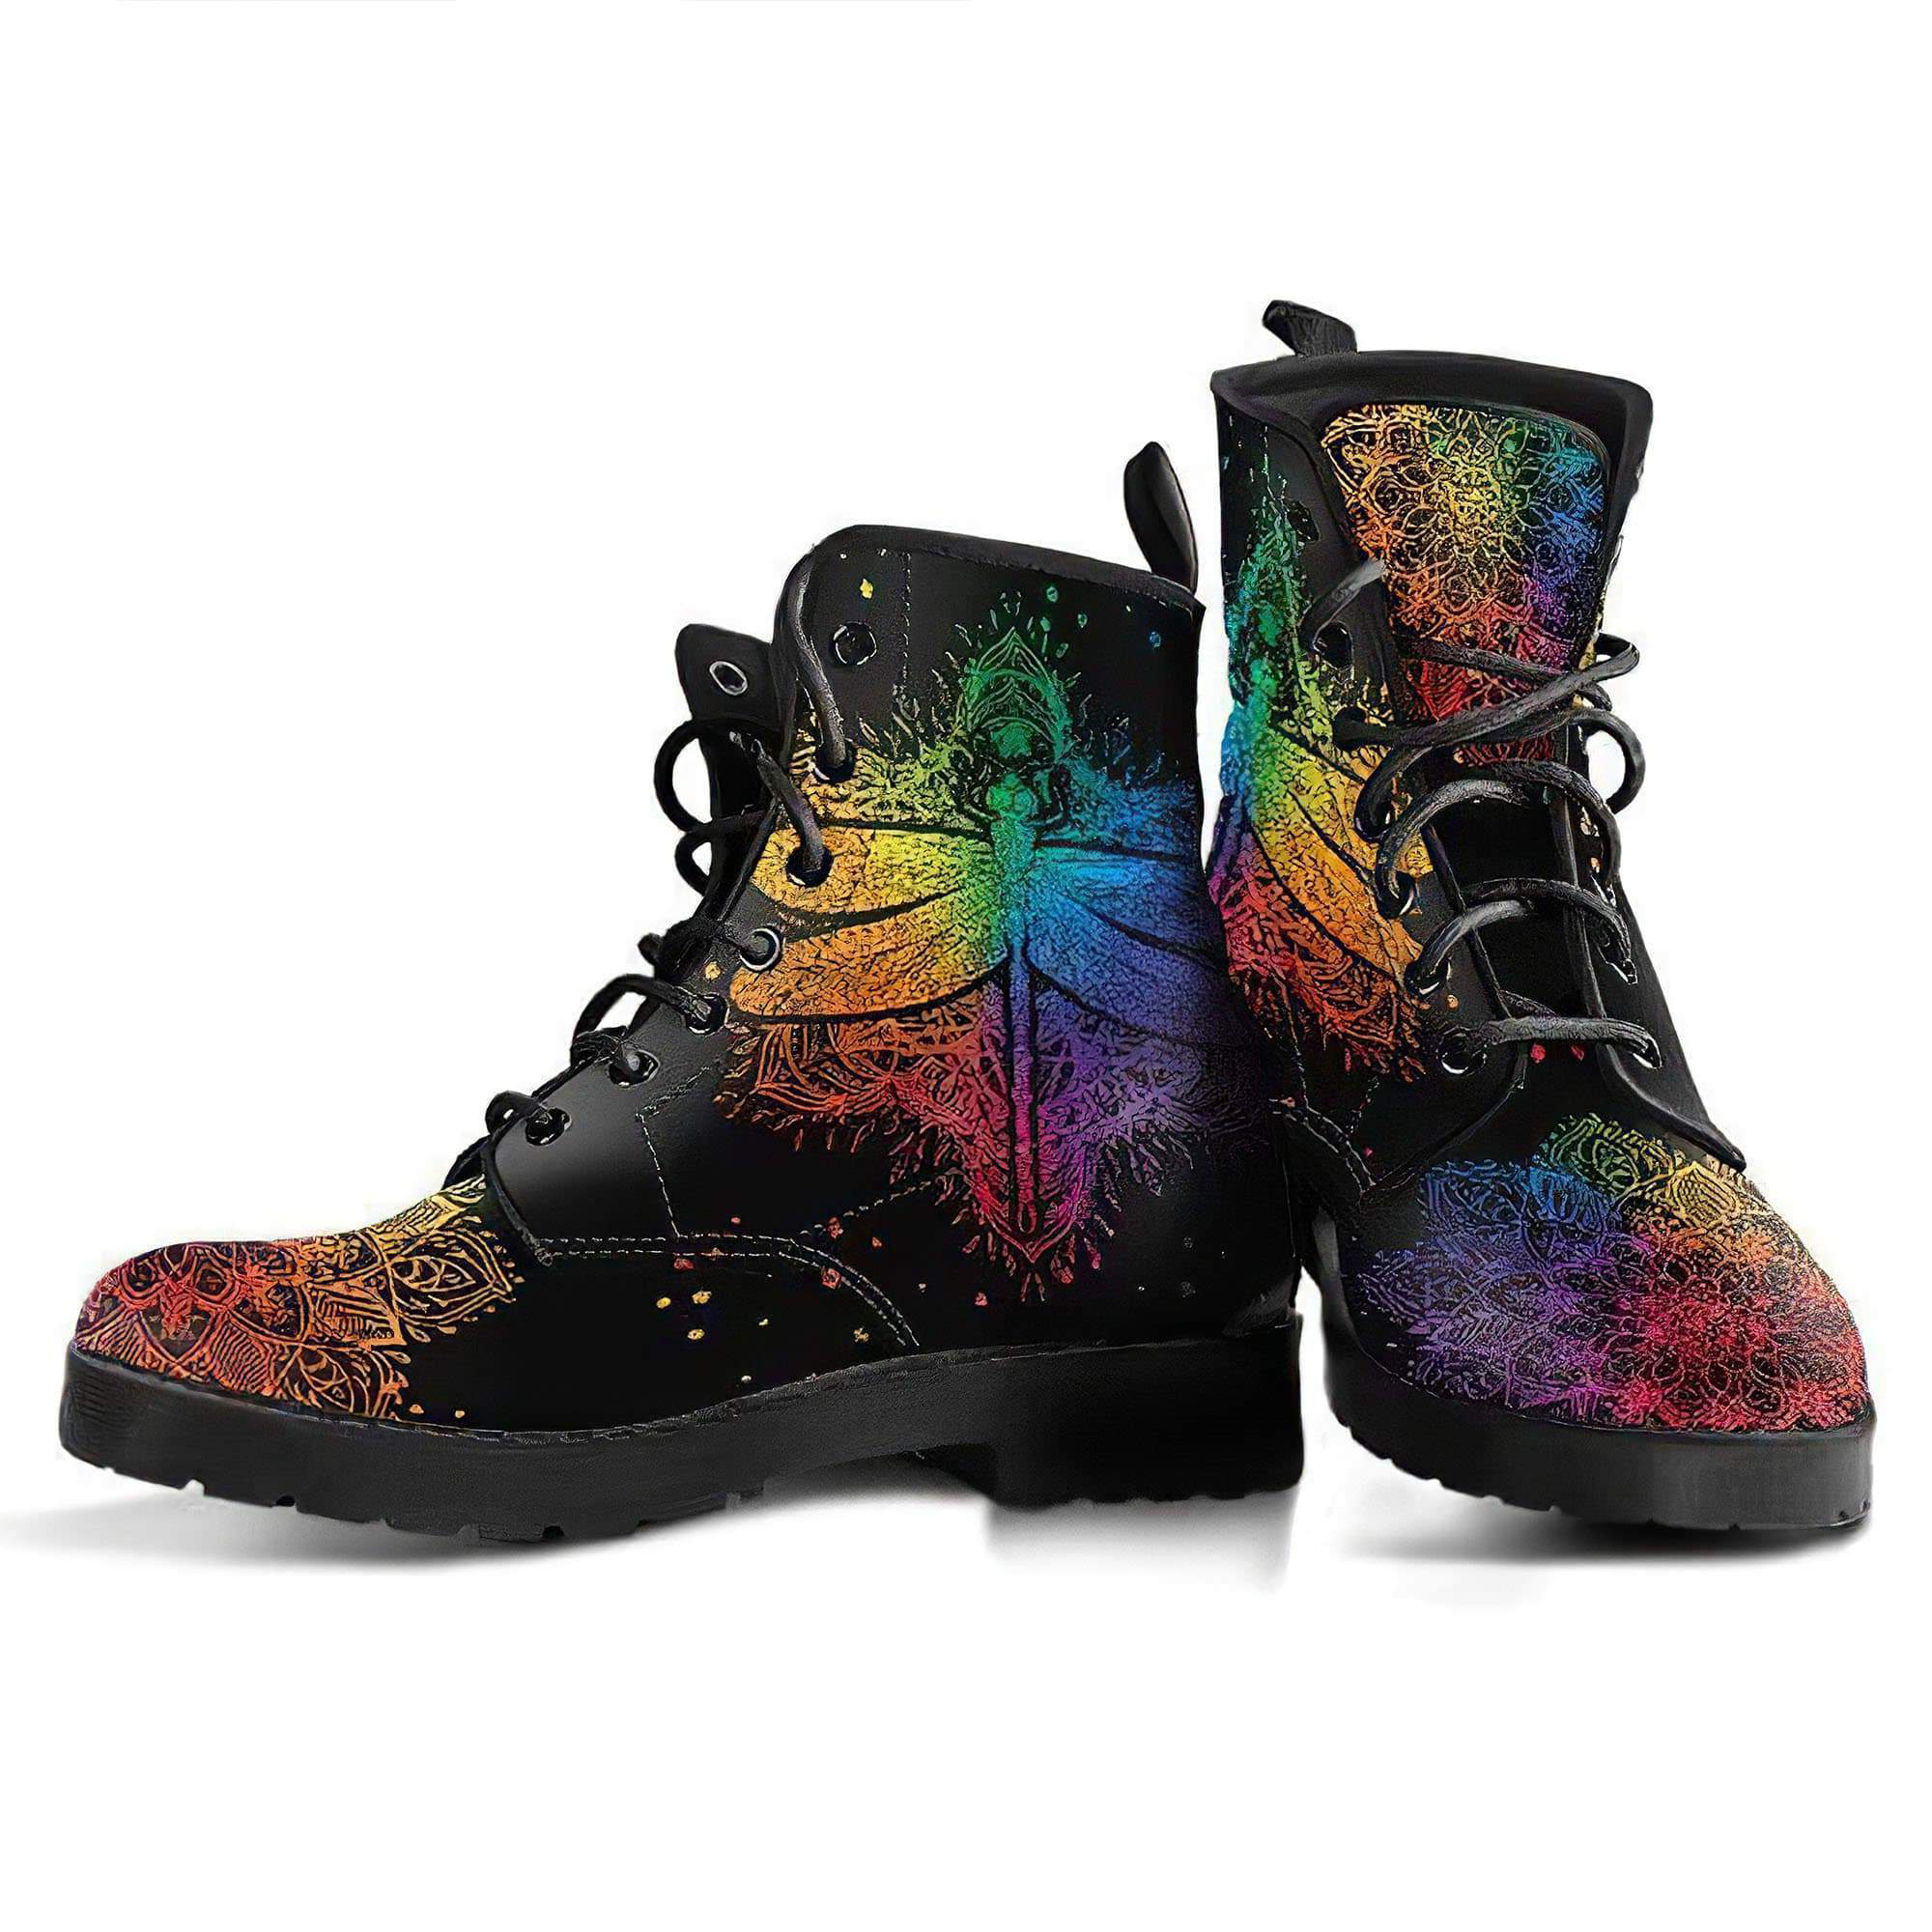 colorful-mandala-dragonfly-handcrafted-boots-women-s-leather-boots-12051829522493.jpg